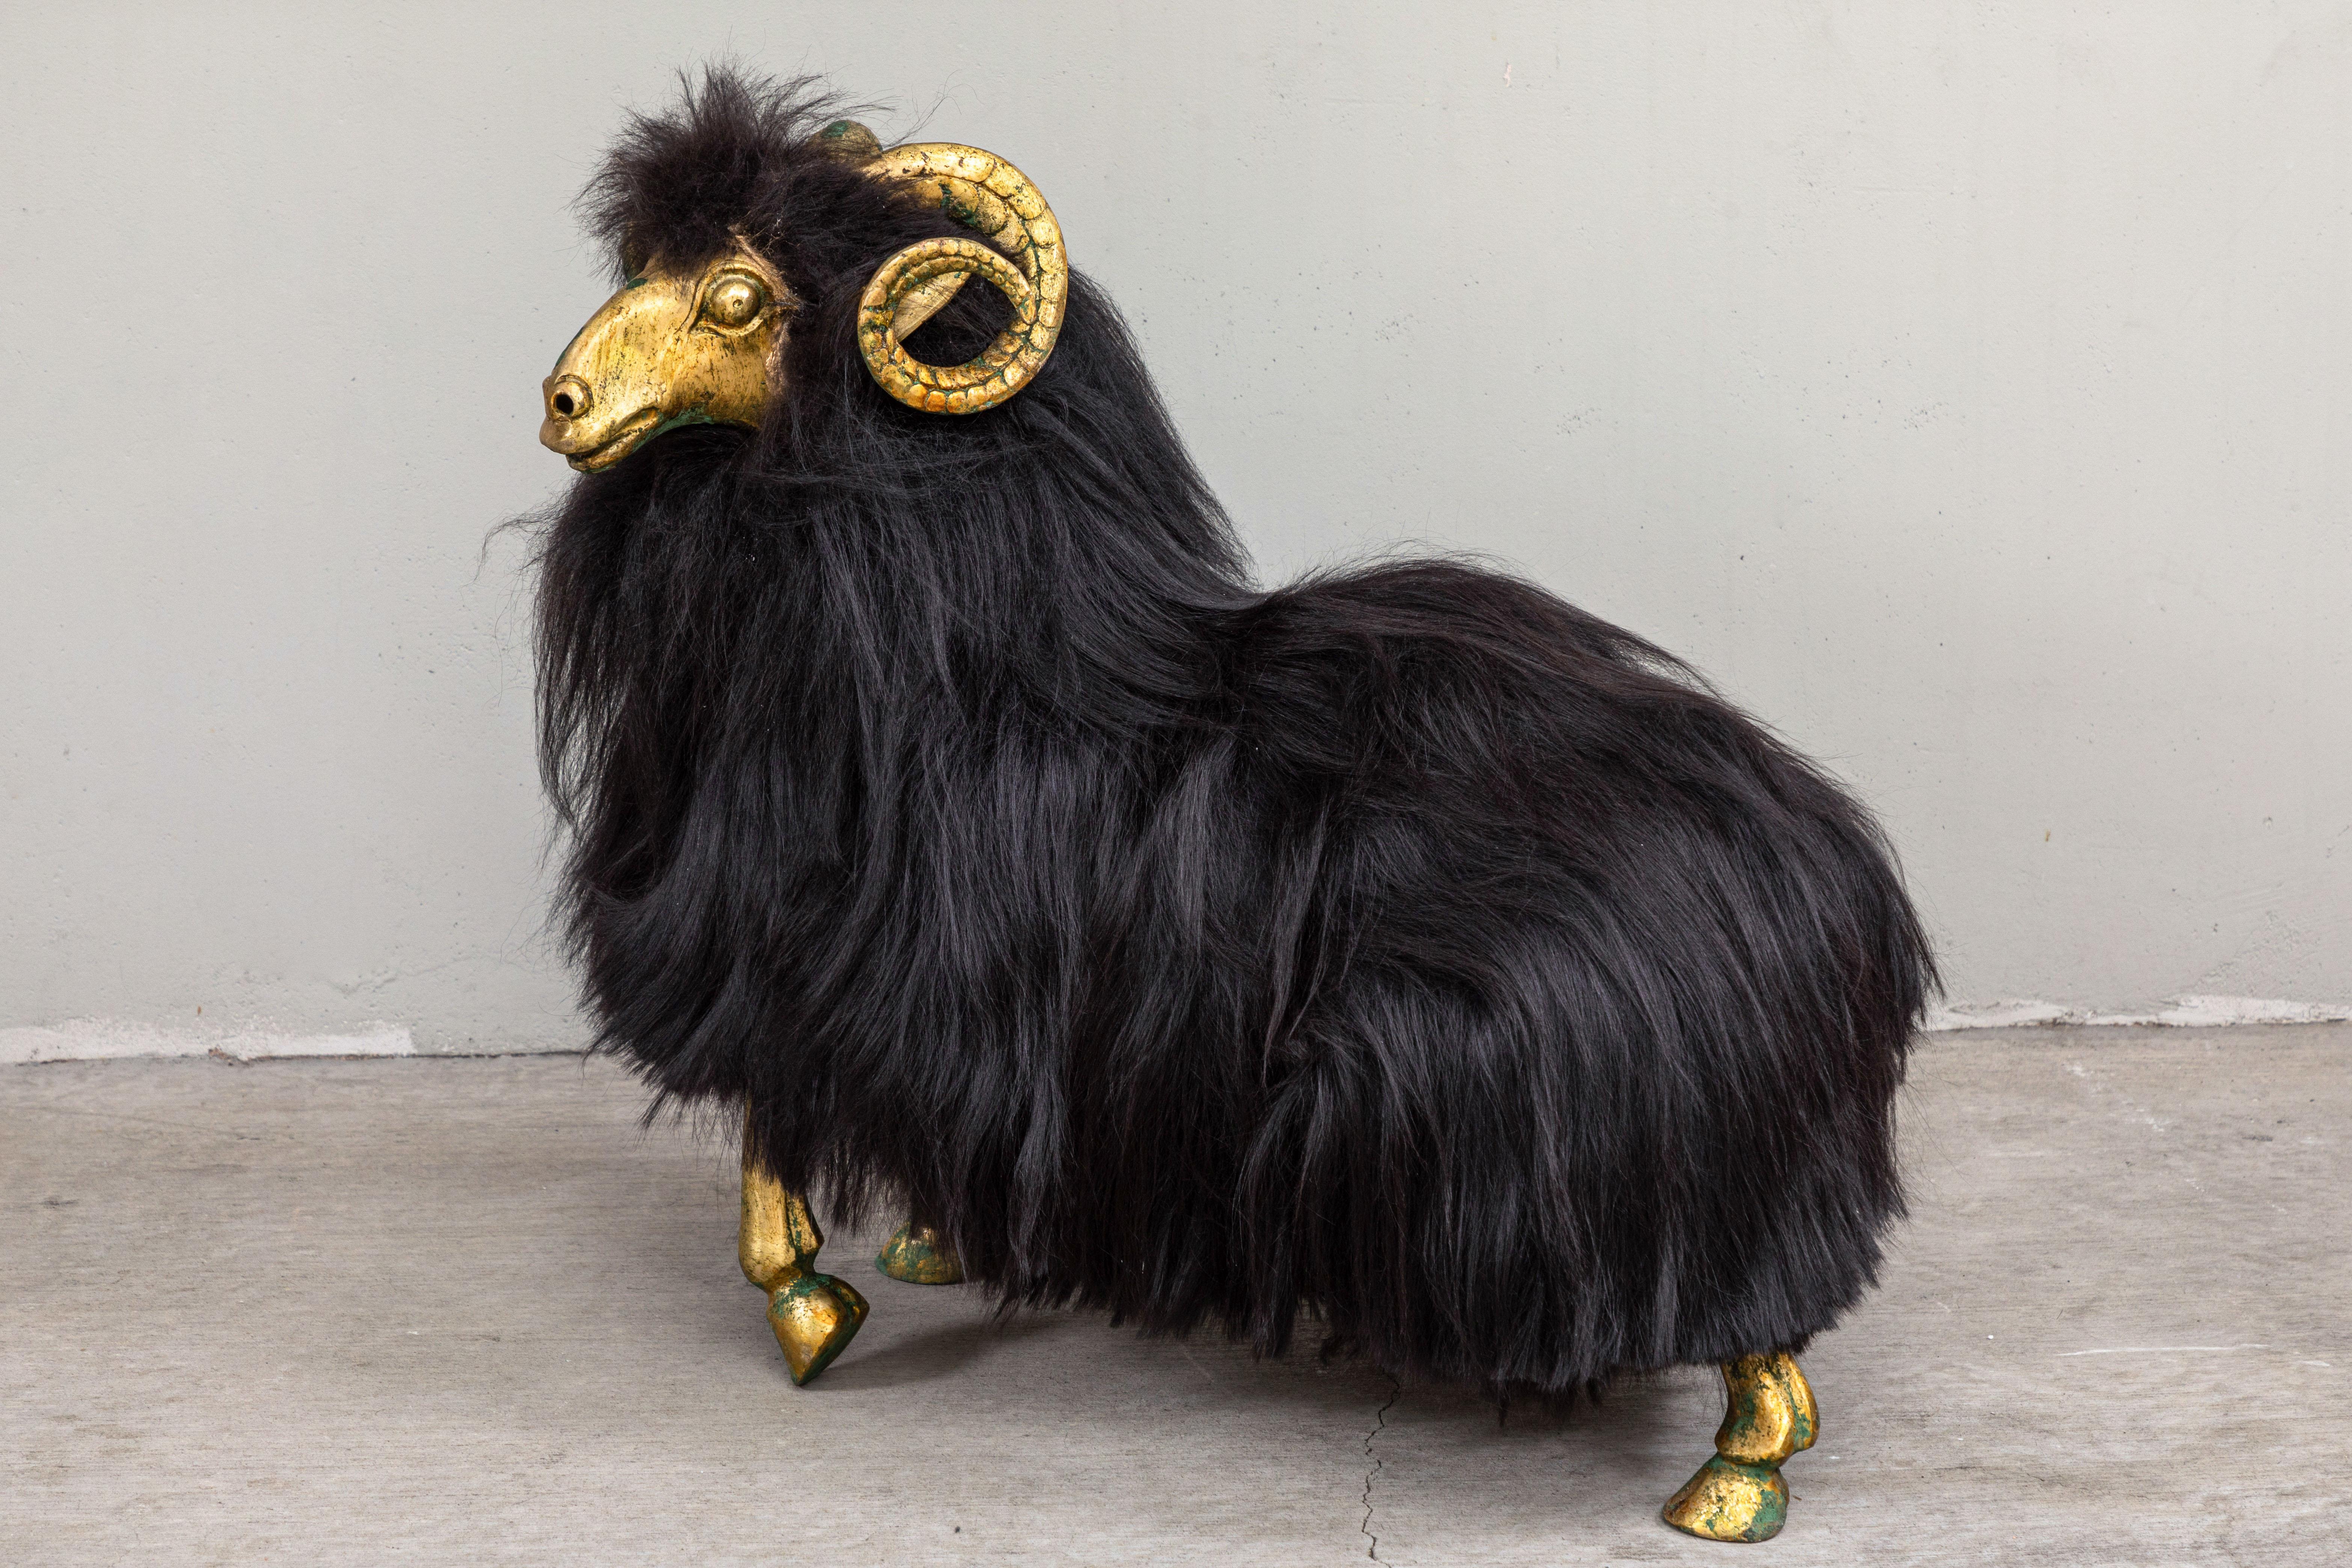 Striking pair of bronze sheep sculptures with long black Icelandic sheep fur. Whimsical and playful, these make striking statement pieces in a variety of settings.